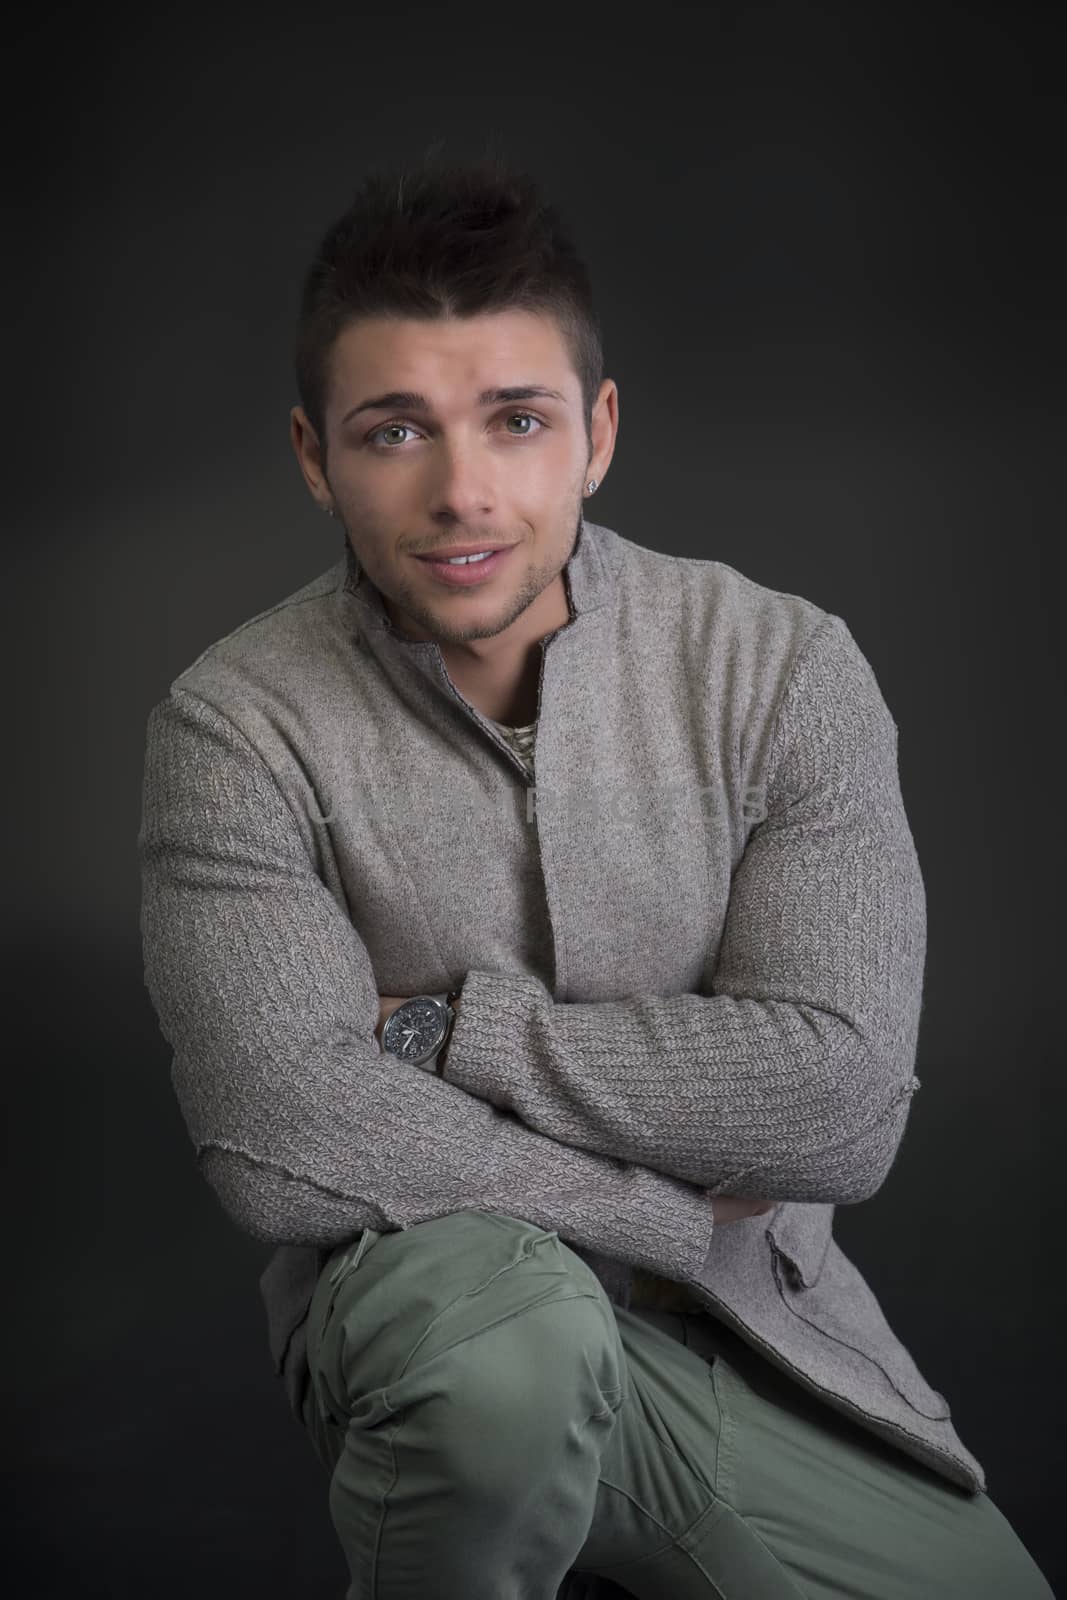 Attractive young man with sweater, sitting on the floor by artofphoto